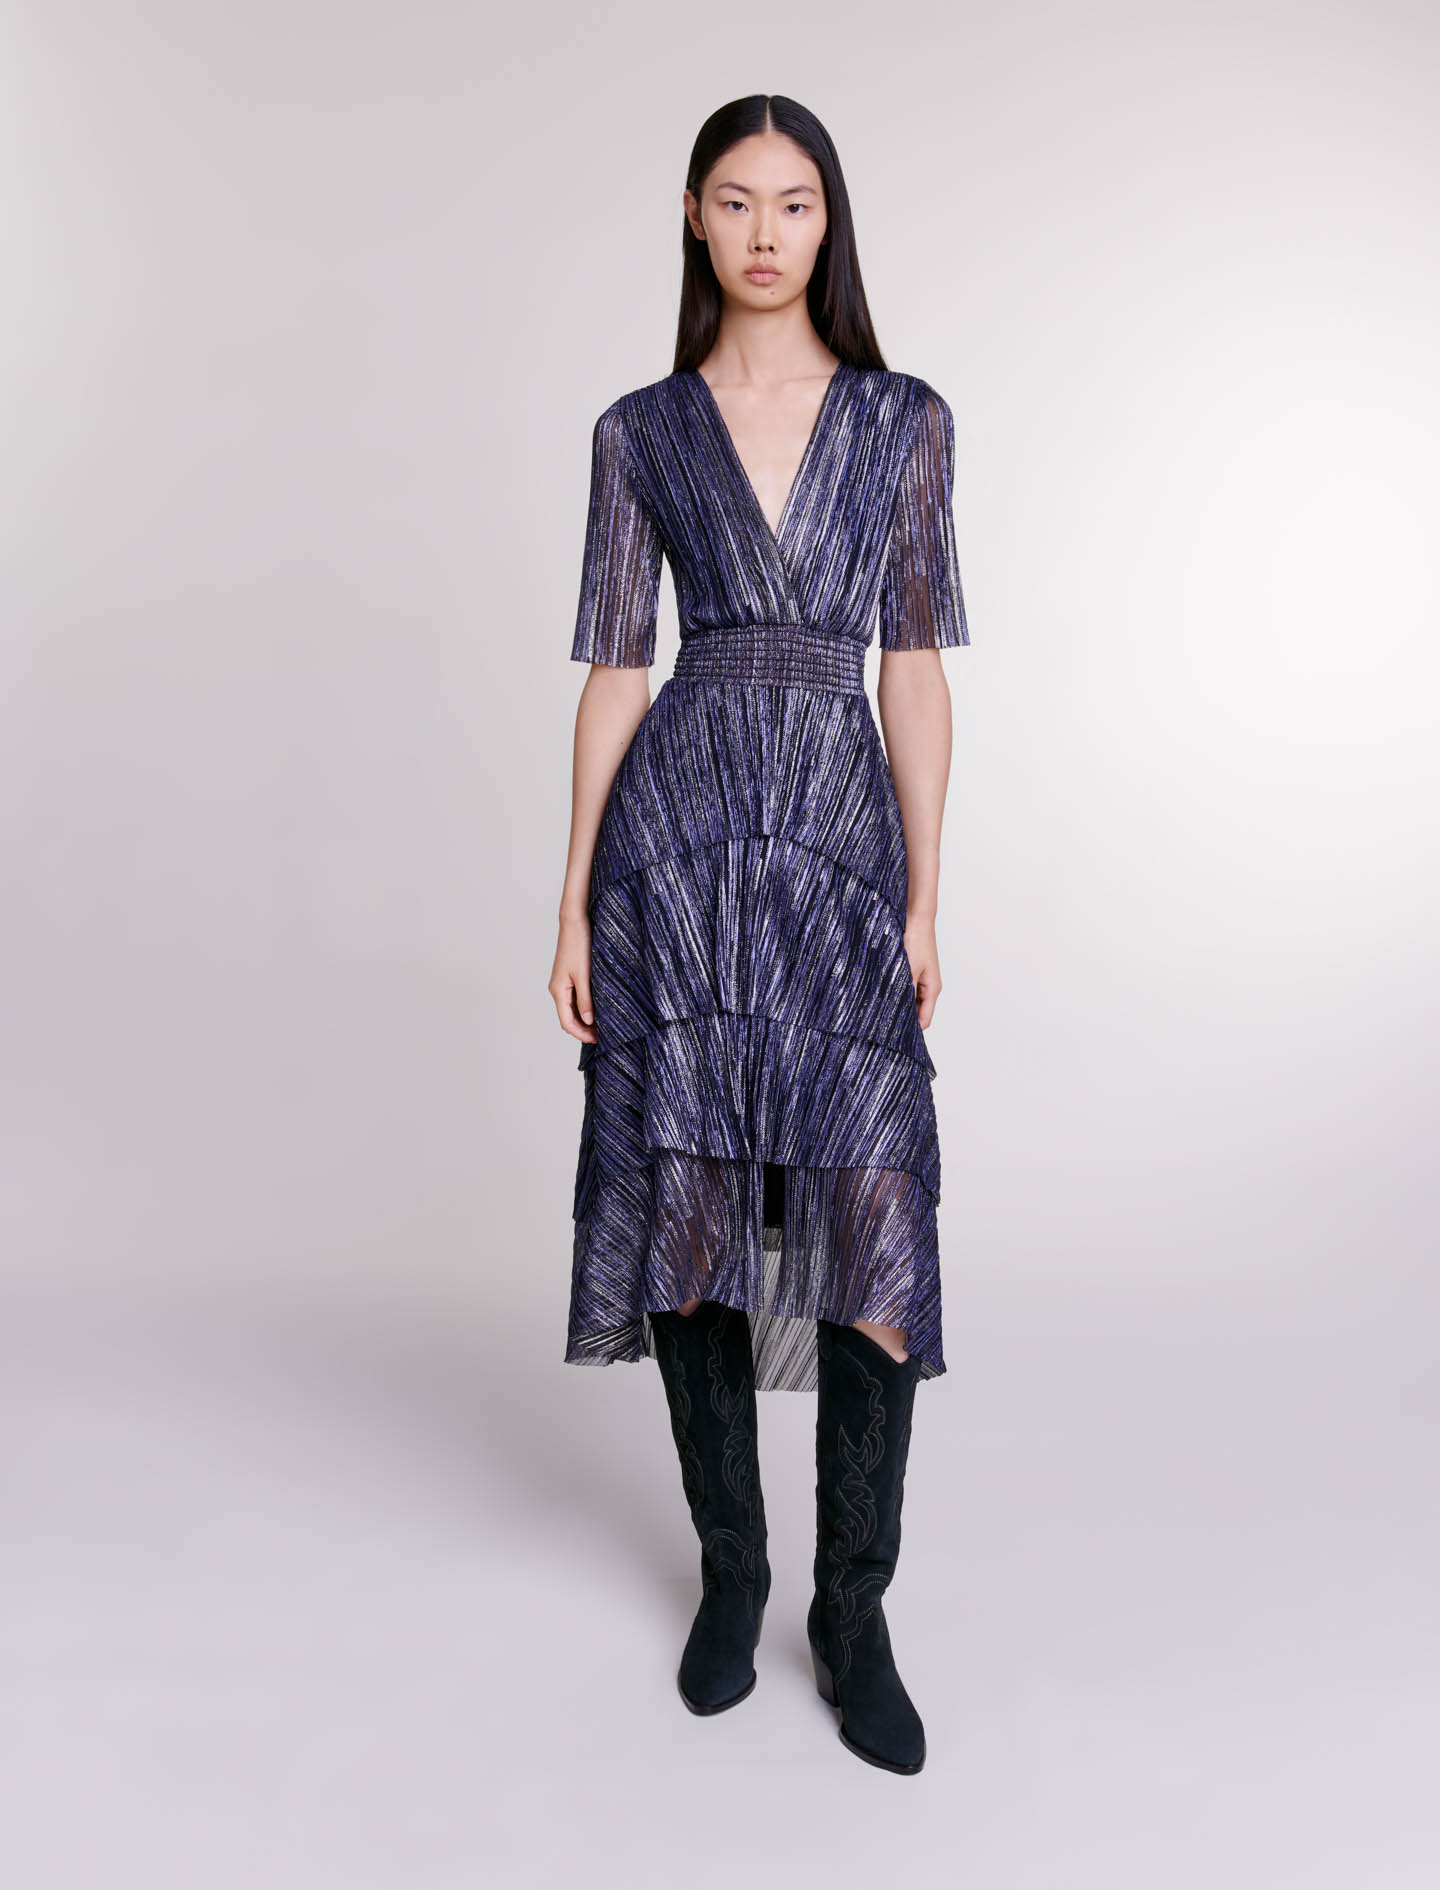 Maje Woman's polyester, Full lamé dress with ruffles for Spring/Summer, in color Navy / Blue